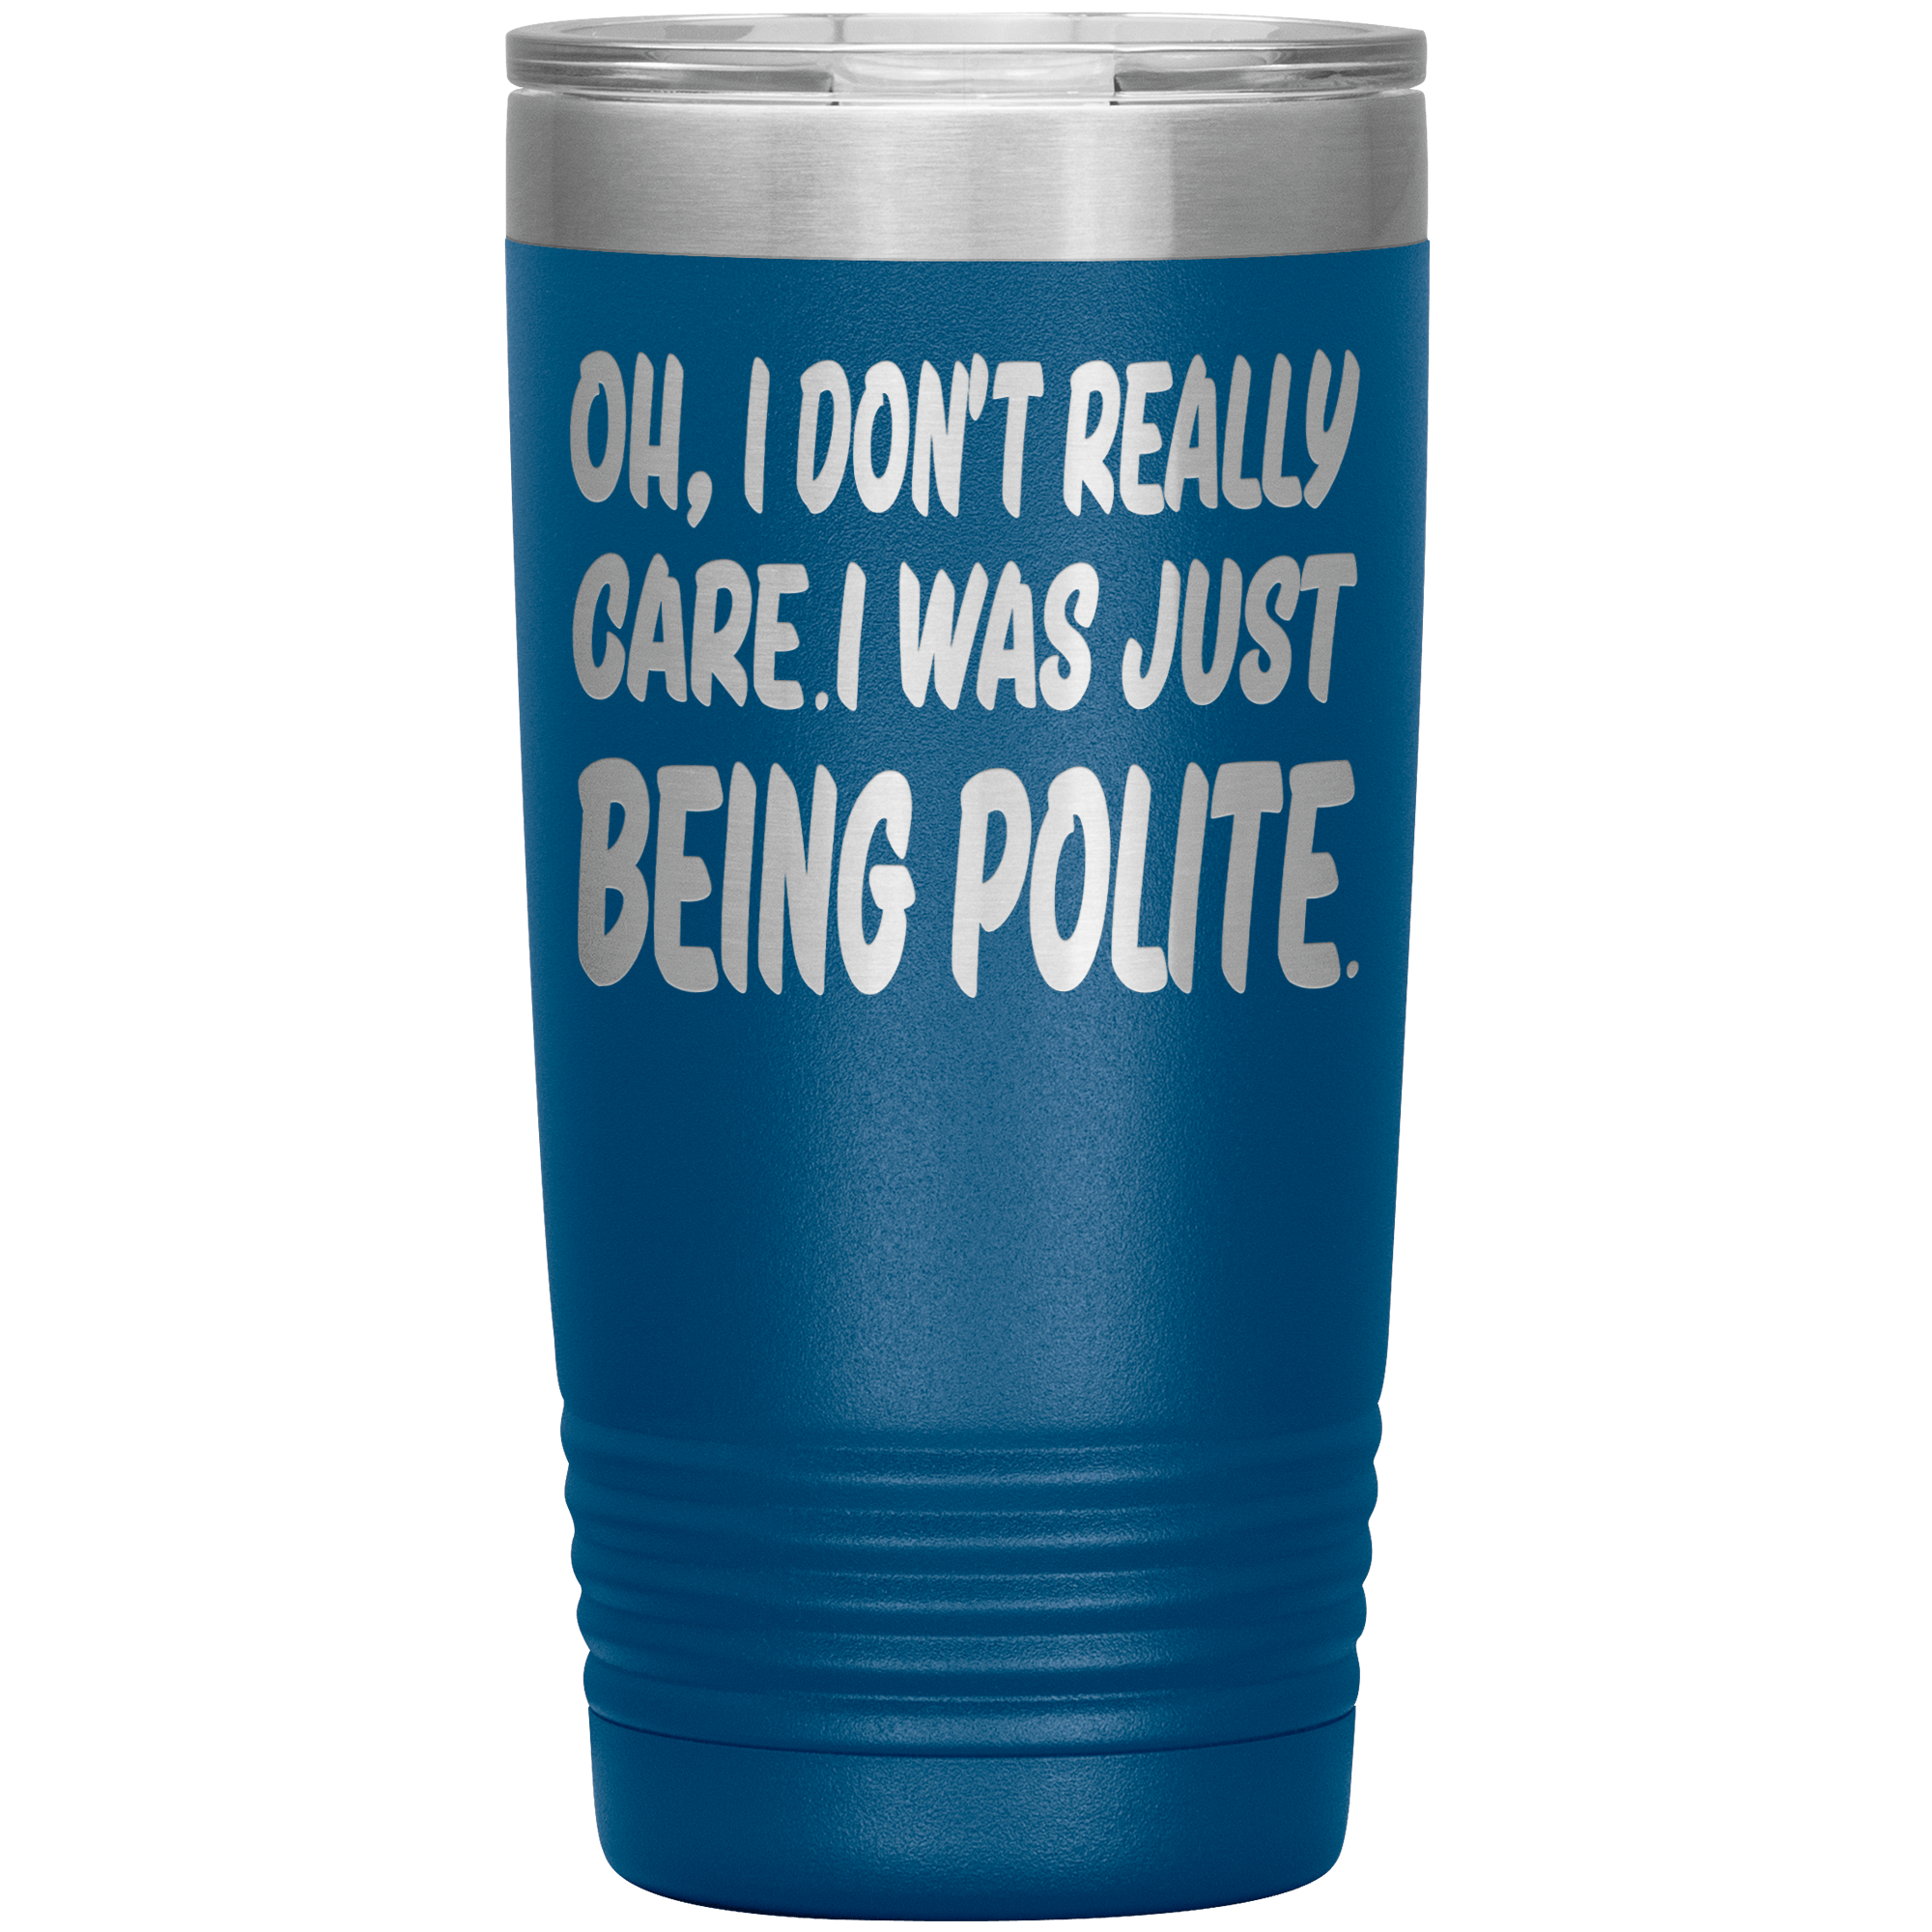 I DON'T REALLY CARE I WAS JUST BEING POLITE - TUMBLER